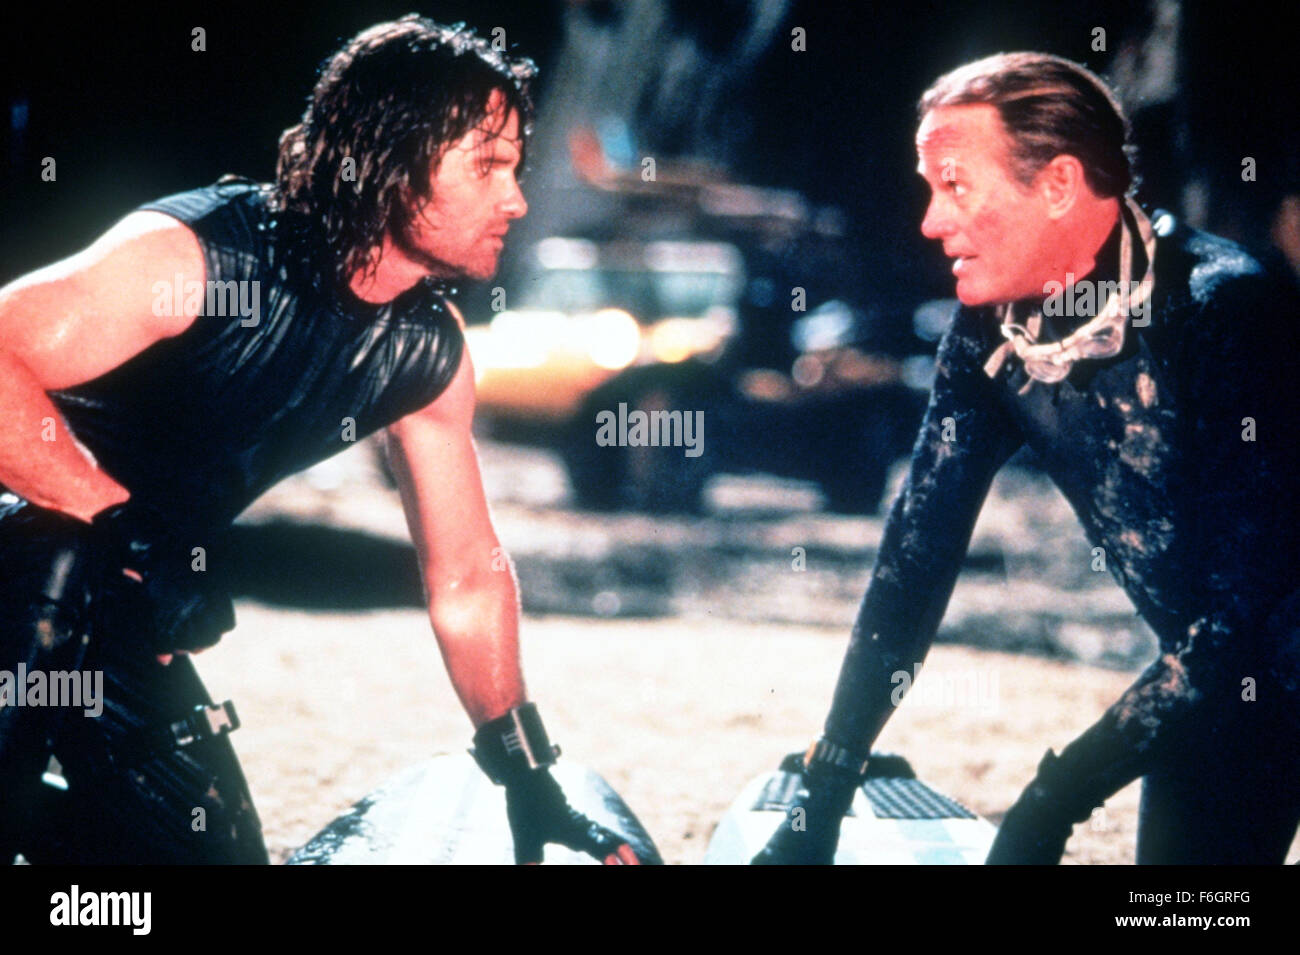 Jun 23, 2000; Los Angeles, CA, USA; (l-r) Actor KURT RUSSELL as Snake Plissken on his mission to save the City of Angels and Actor PETER FONDA as Pipeline a burnt-out surfer star in 'Escape From L.A.' directed by JOHN CARPENTER..  (Credit Image: ) Stock Photo